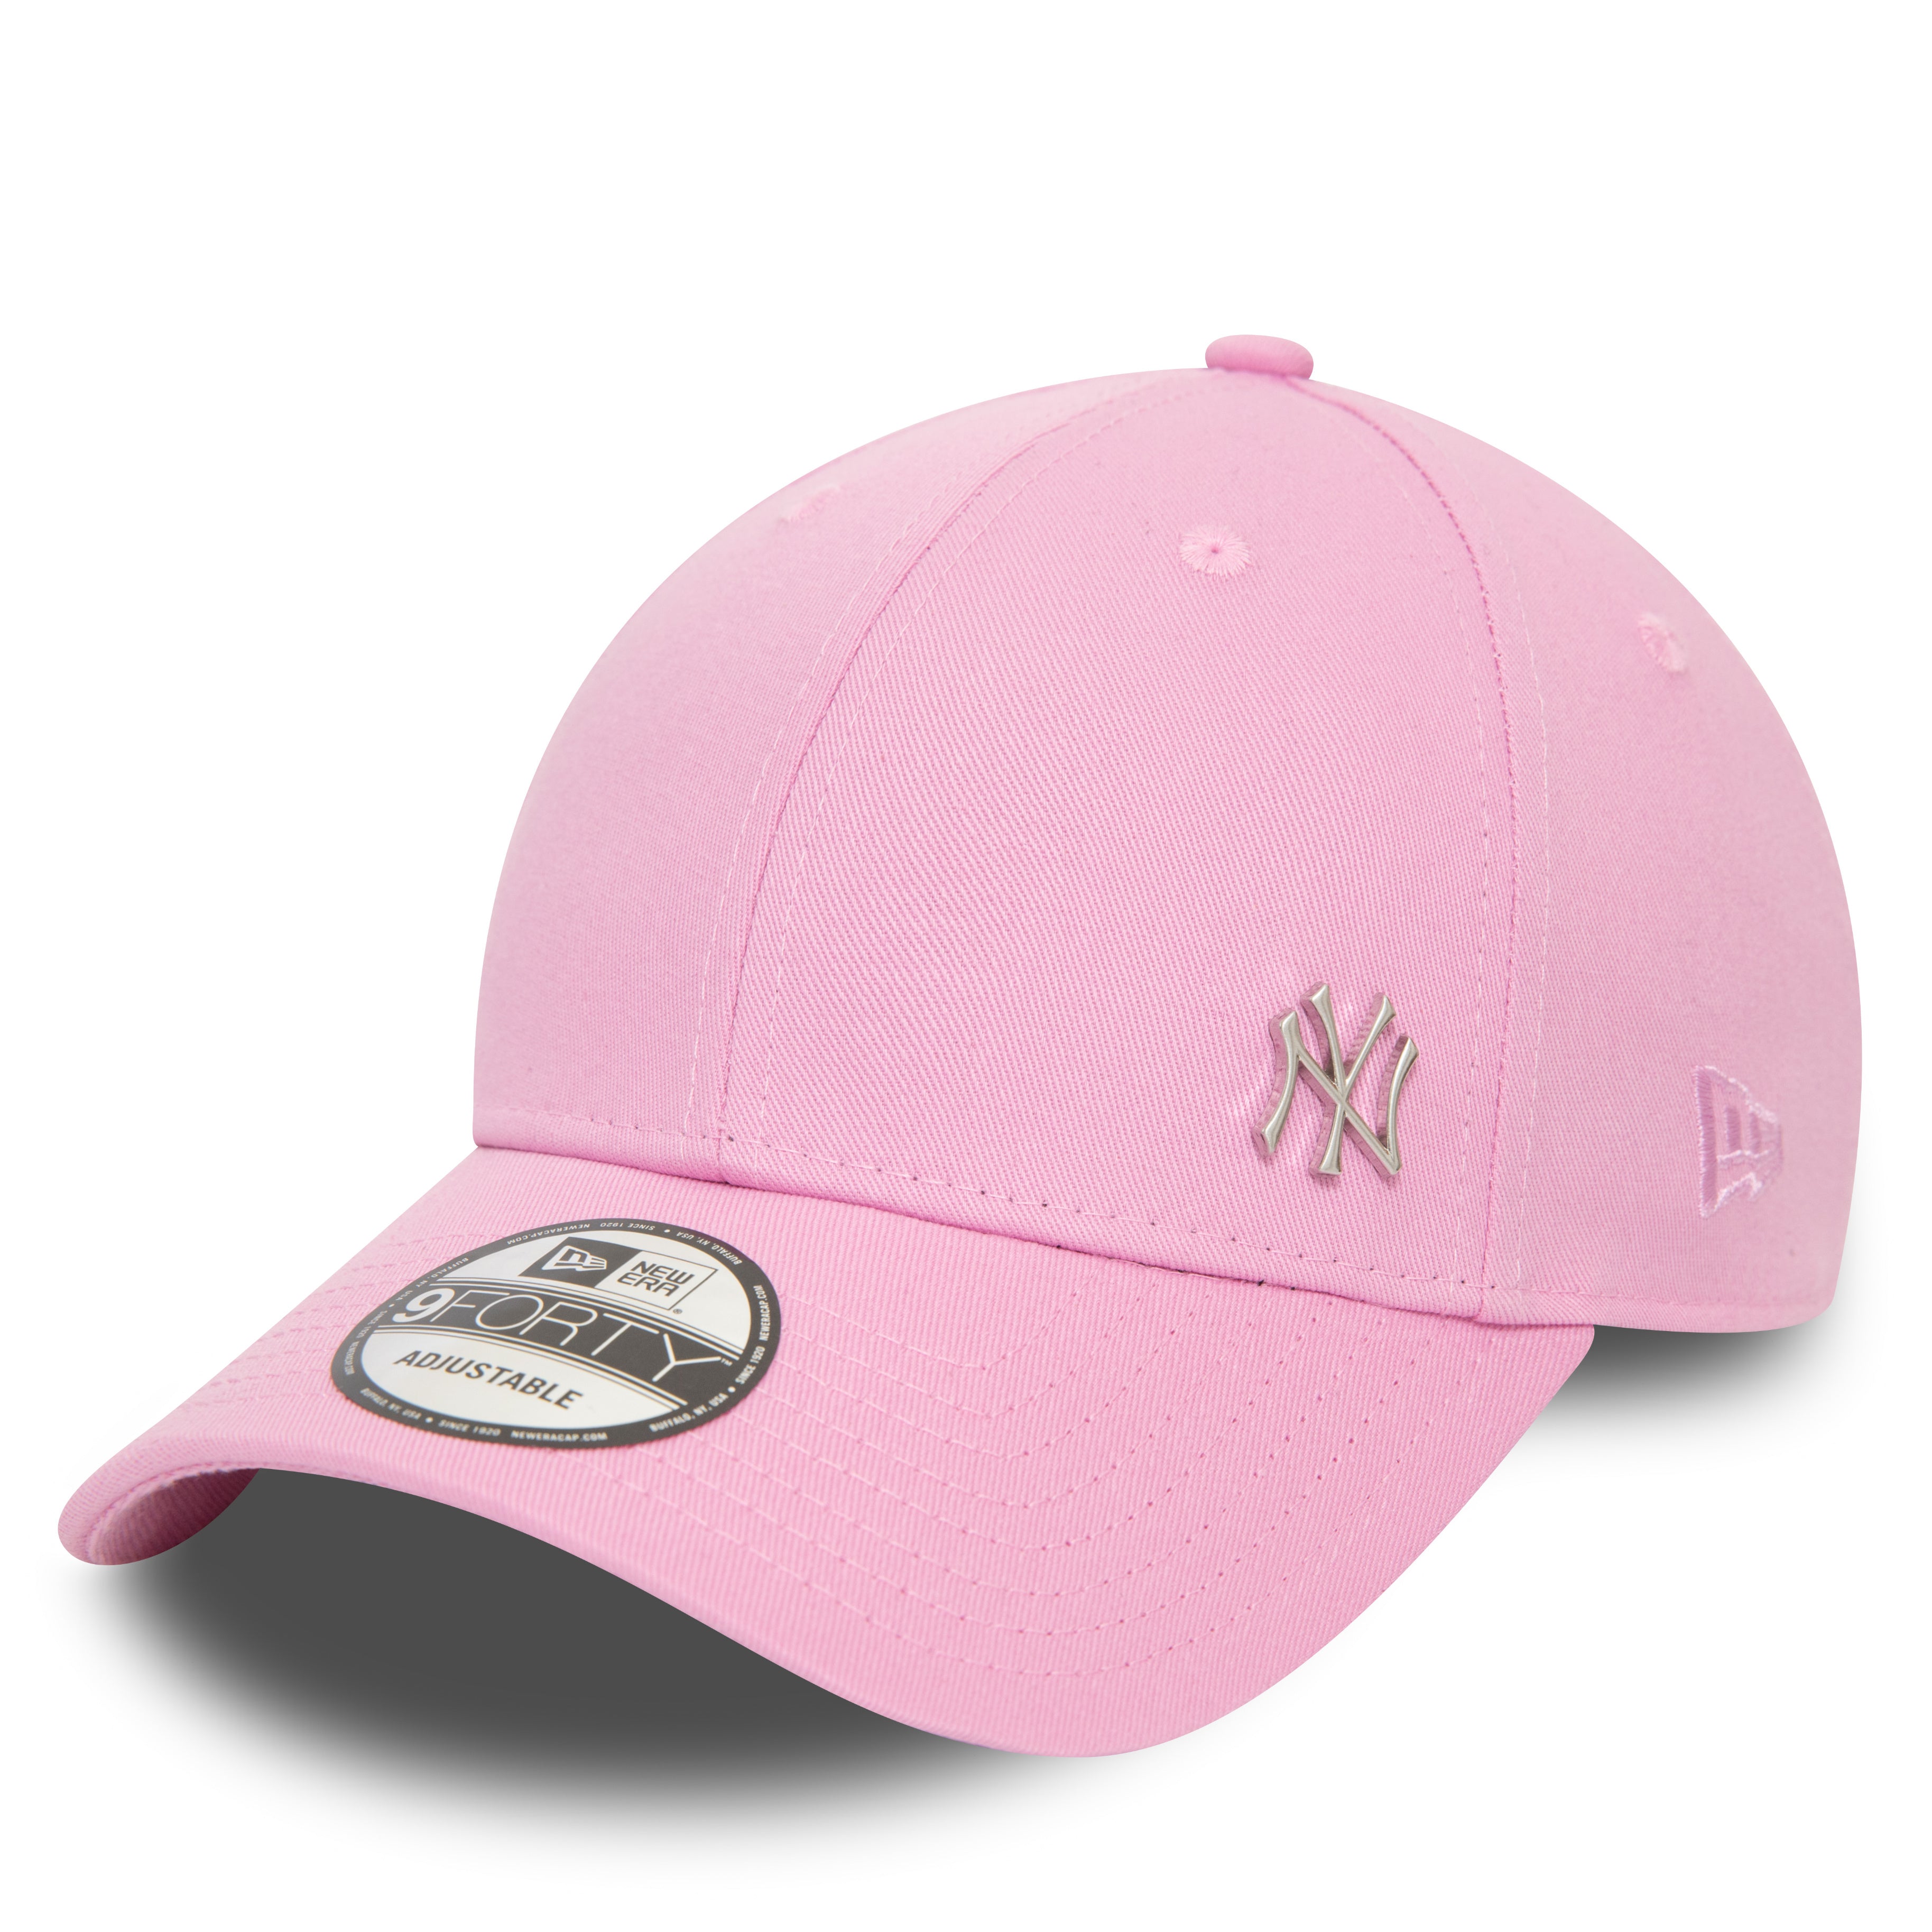 NEW ERA 9FORTY FLAWLESS NEW YORK YANKEES PINK CAP